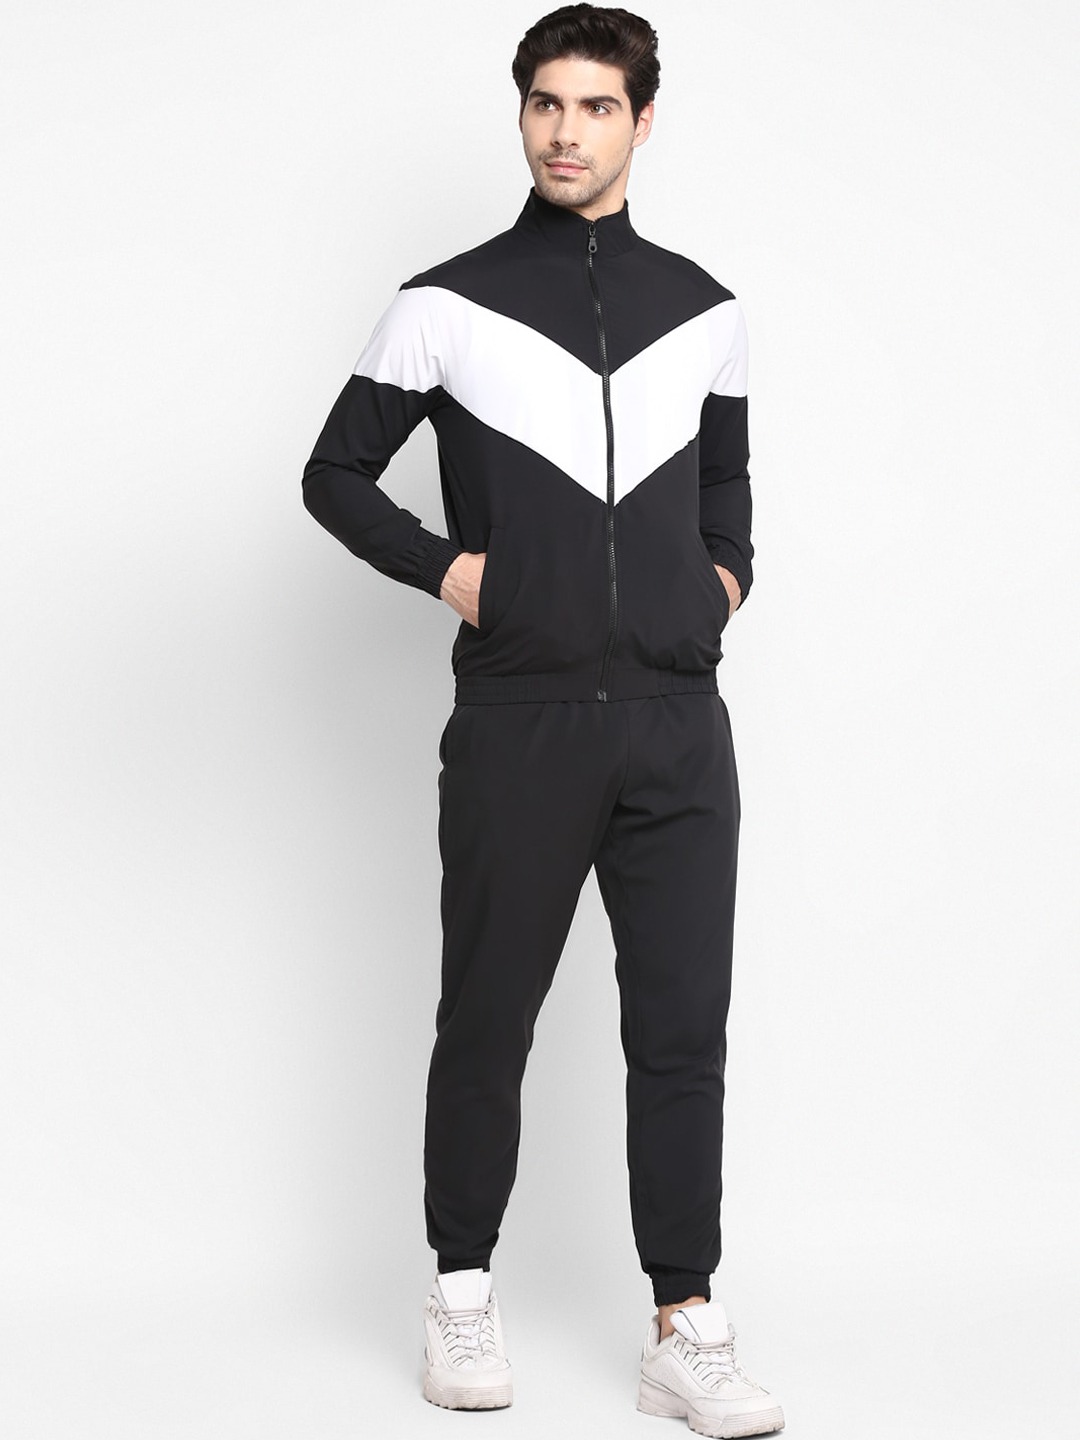 Clothing Tracksuits | OFF LIMITS Men Black & White Colourblocked Tracksuits - LD39017